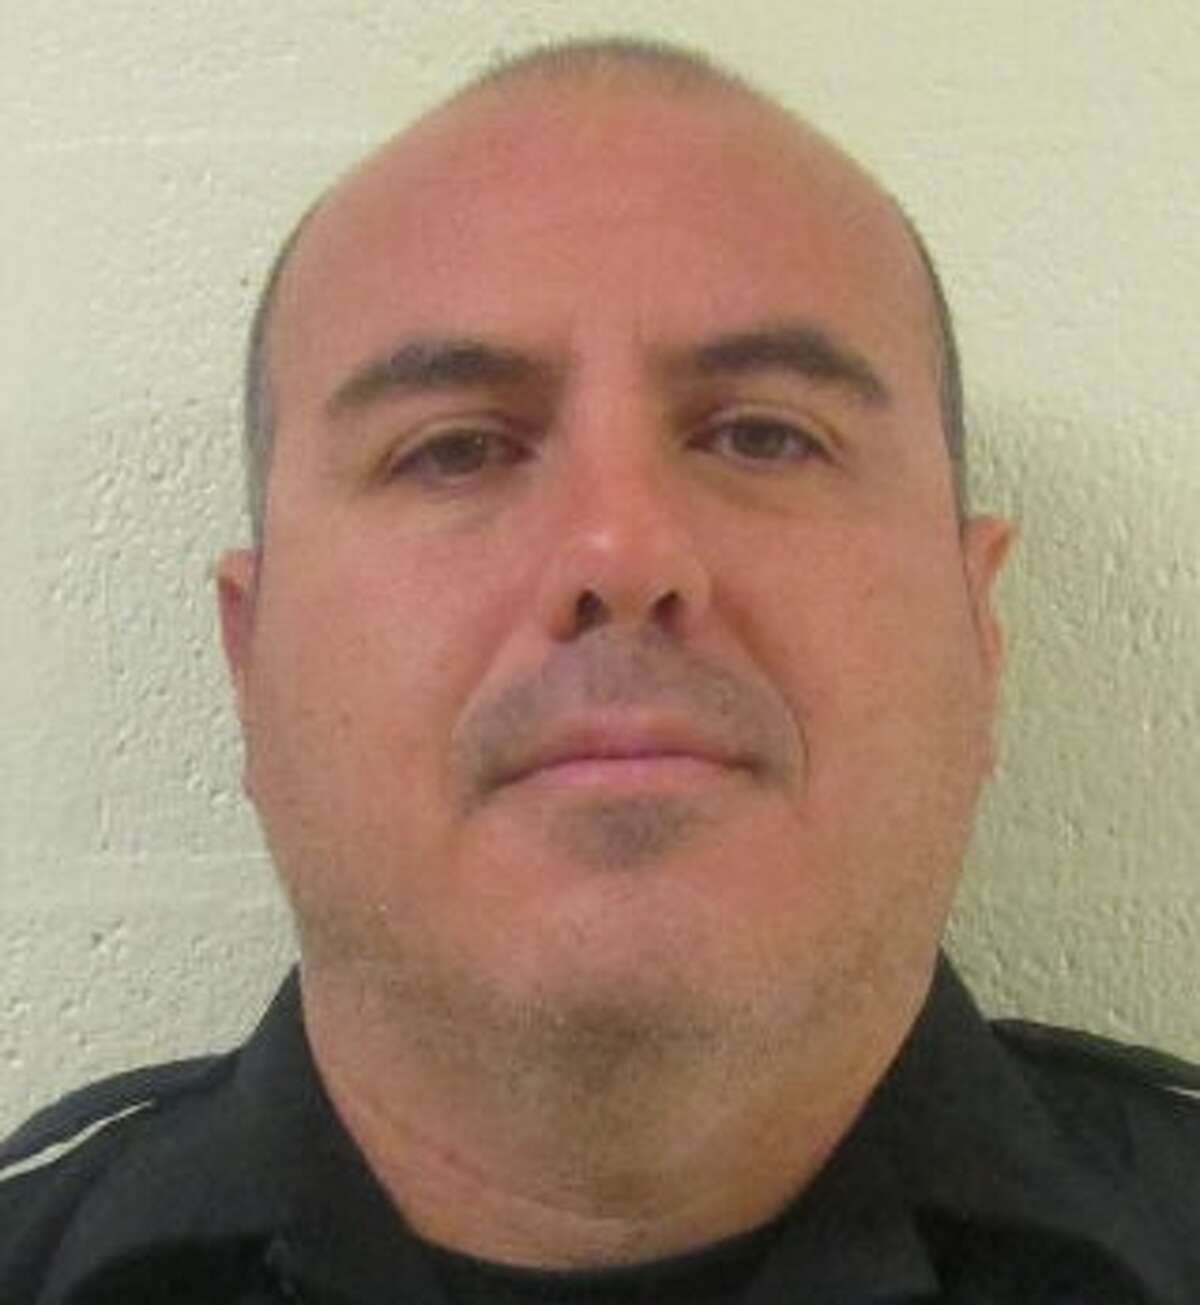 Michael Fernandez, a deputy with the Bexar County Sheriff's Office, was convicted for tampering with evidence.